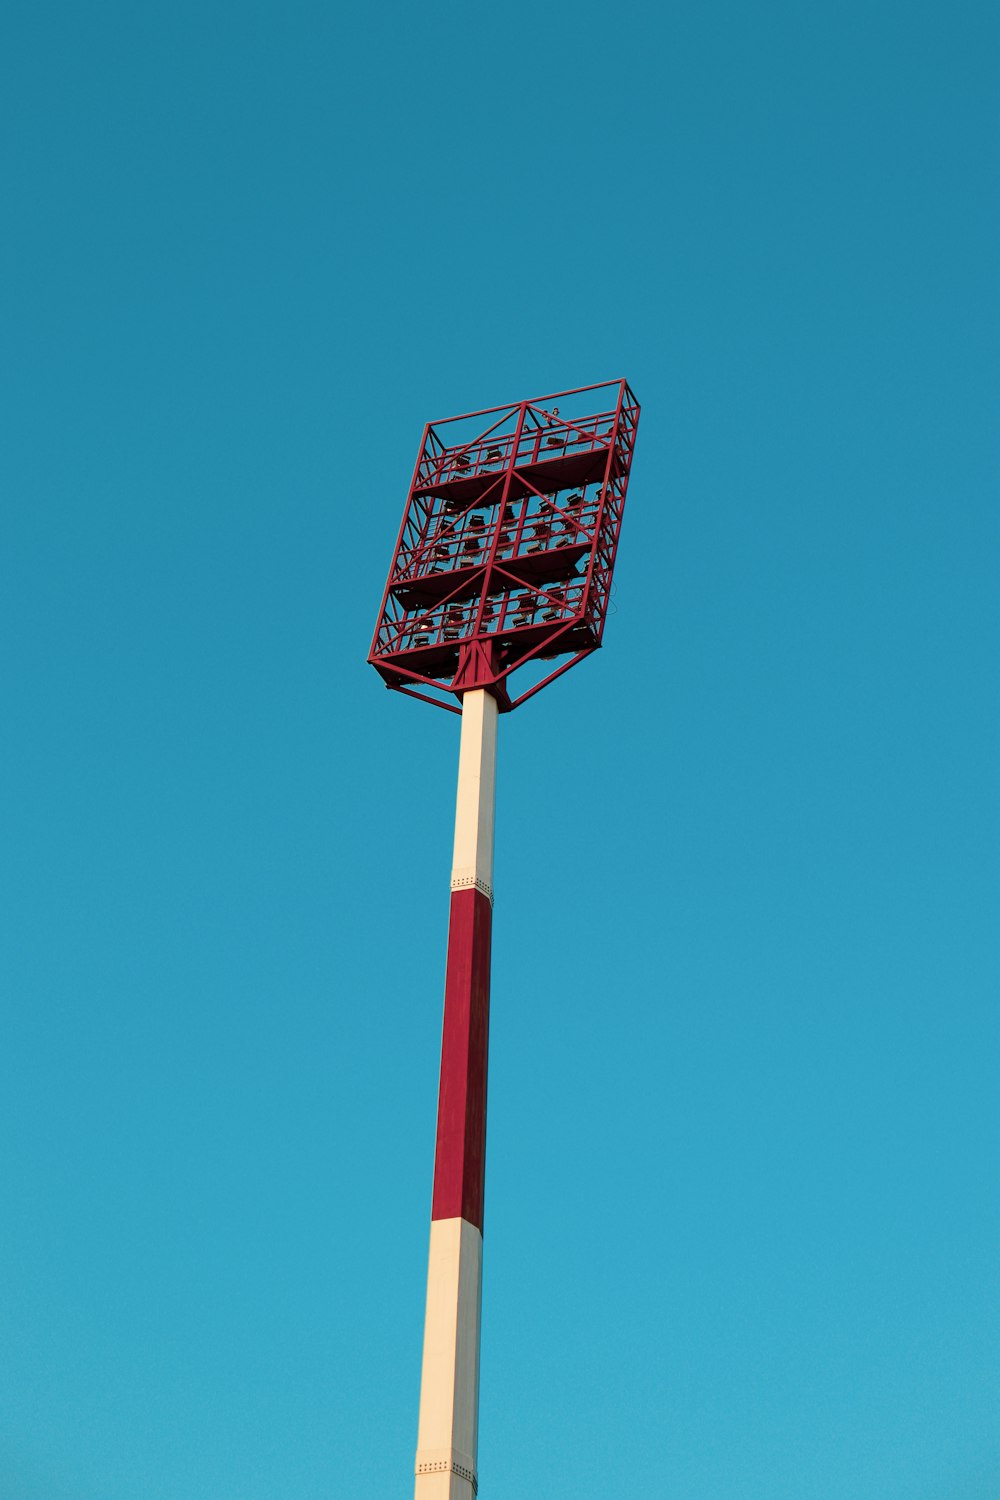 a tall red and white pole with a sign on top